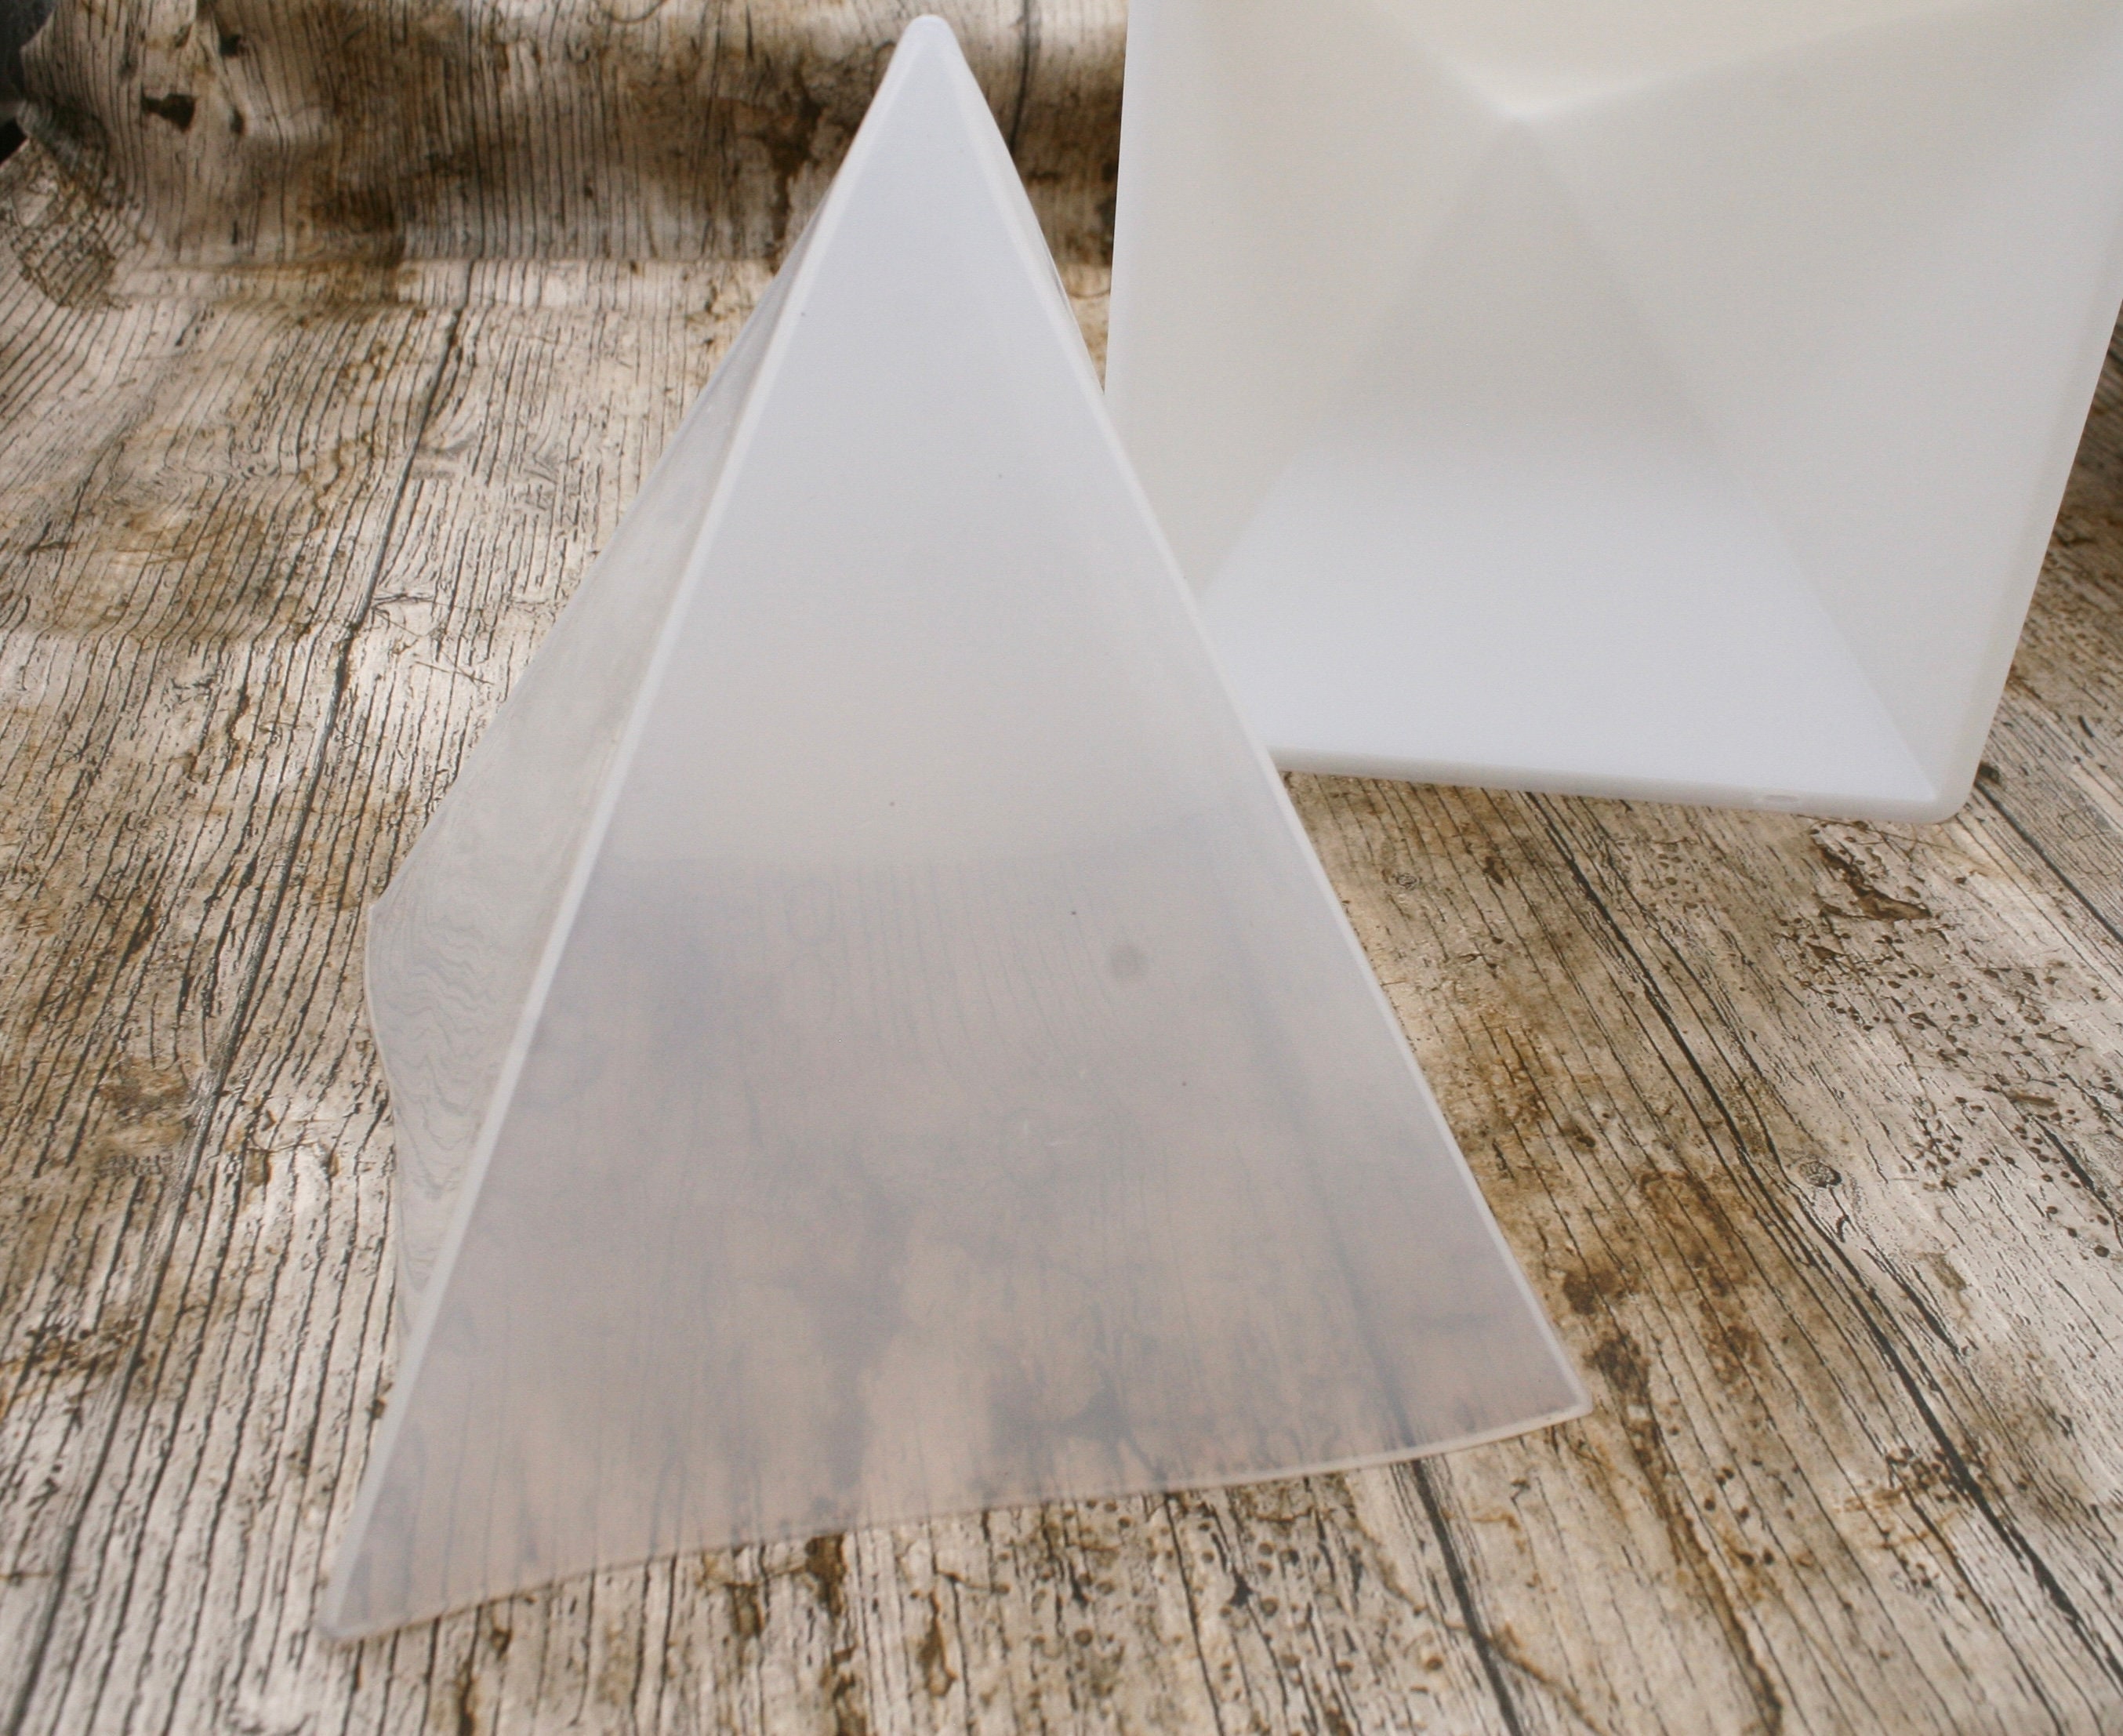 3 Super Large Clear Silicone Pyramid Molds for Resin, 3Pcs 4.7''6''7.5''  Inner Pyramid Silicone Molds + 1Pcs Plastic Frame, Silicone Resin Molds for